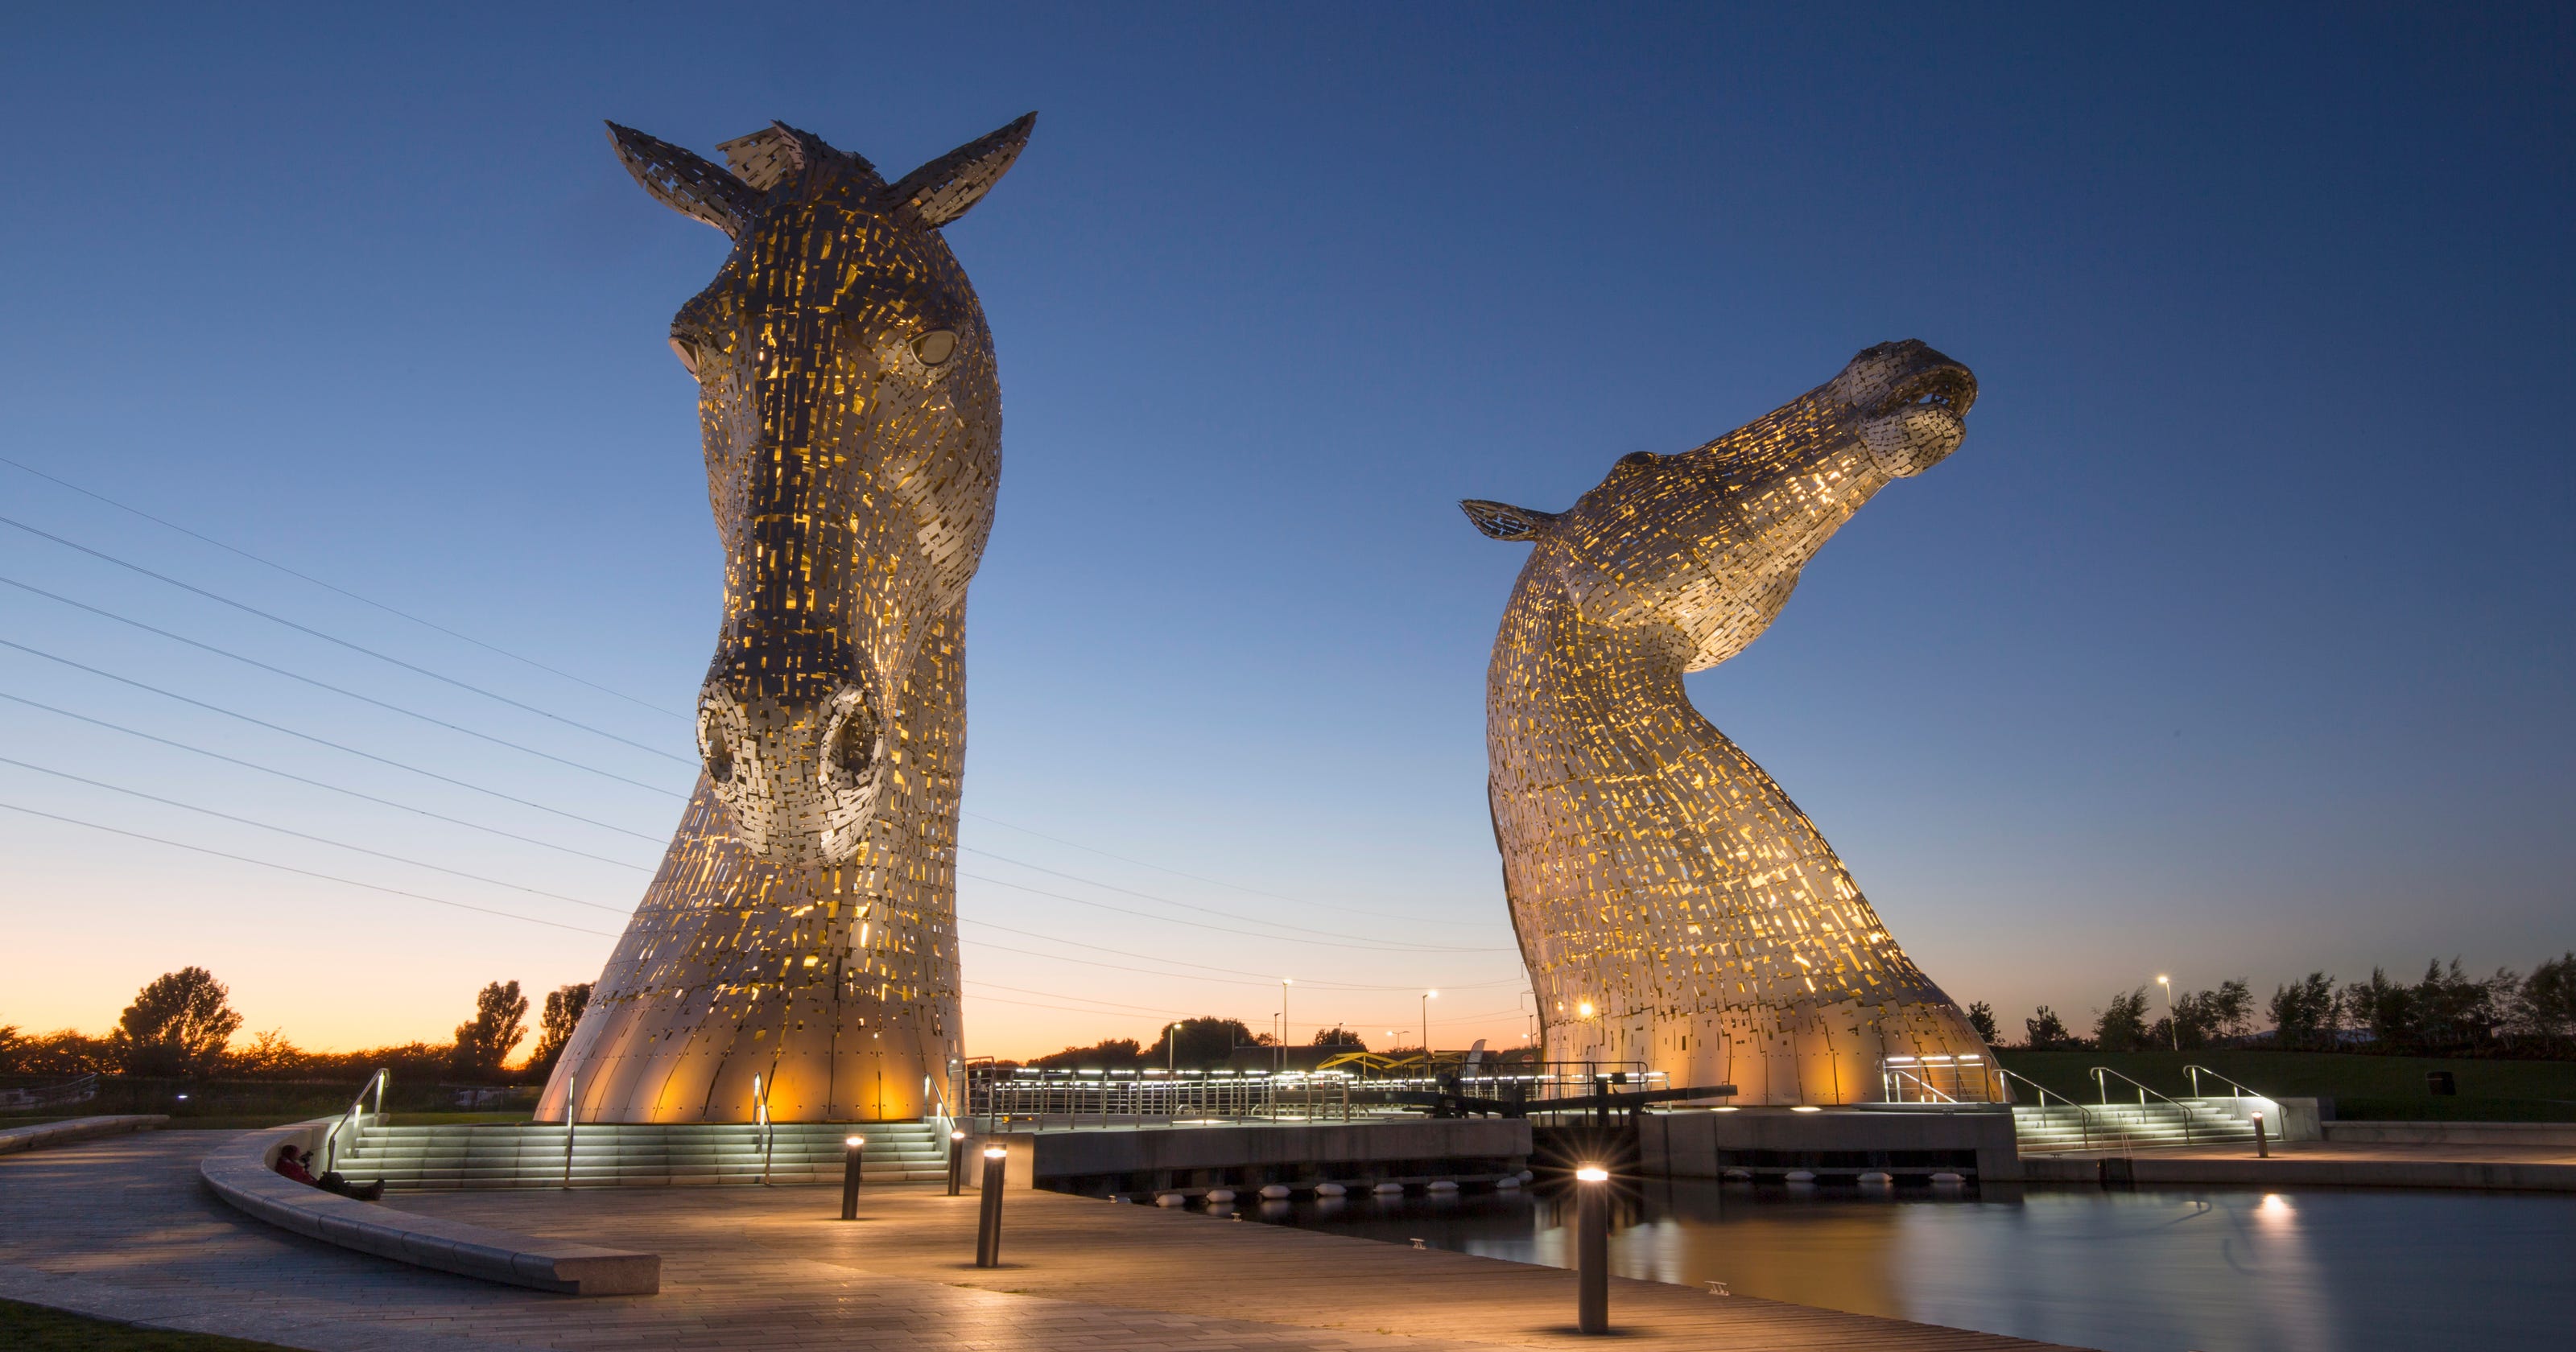 40 must-see structures in Scotland